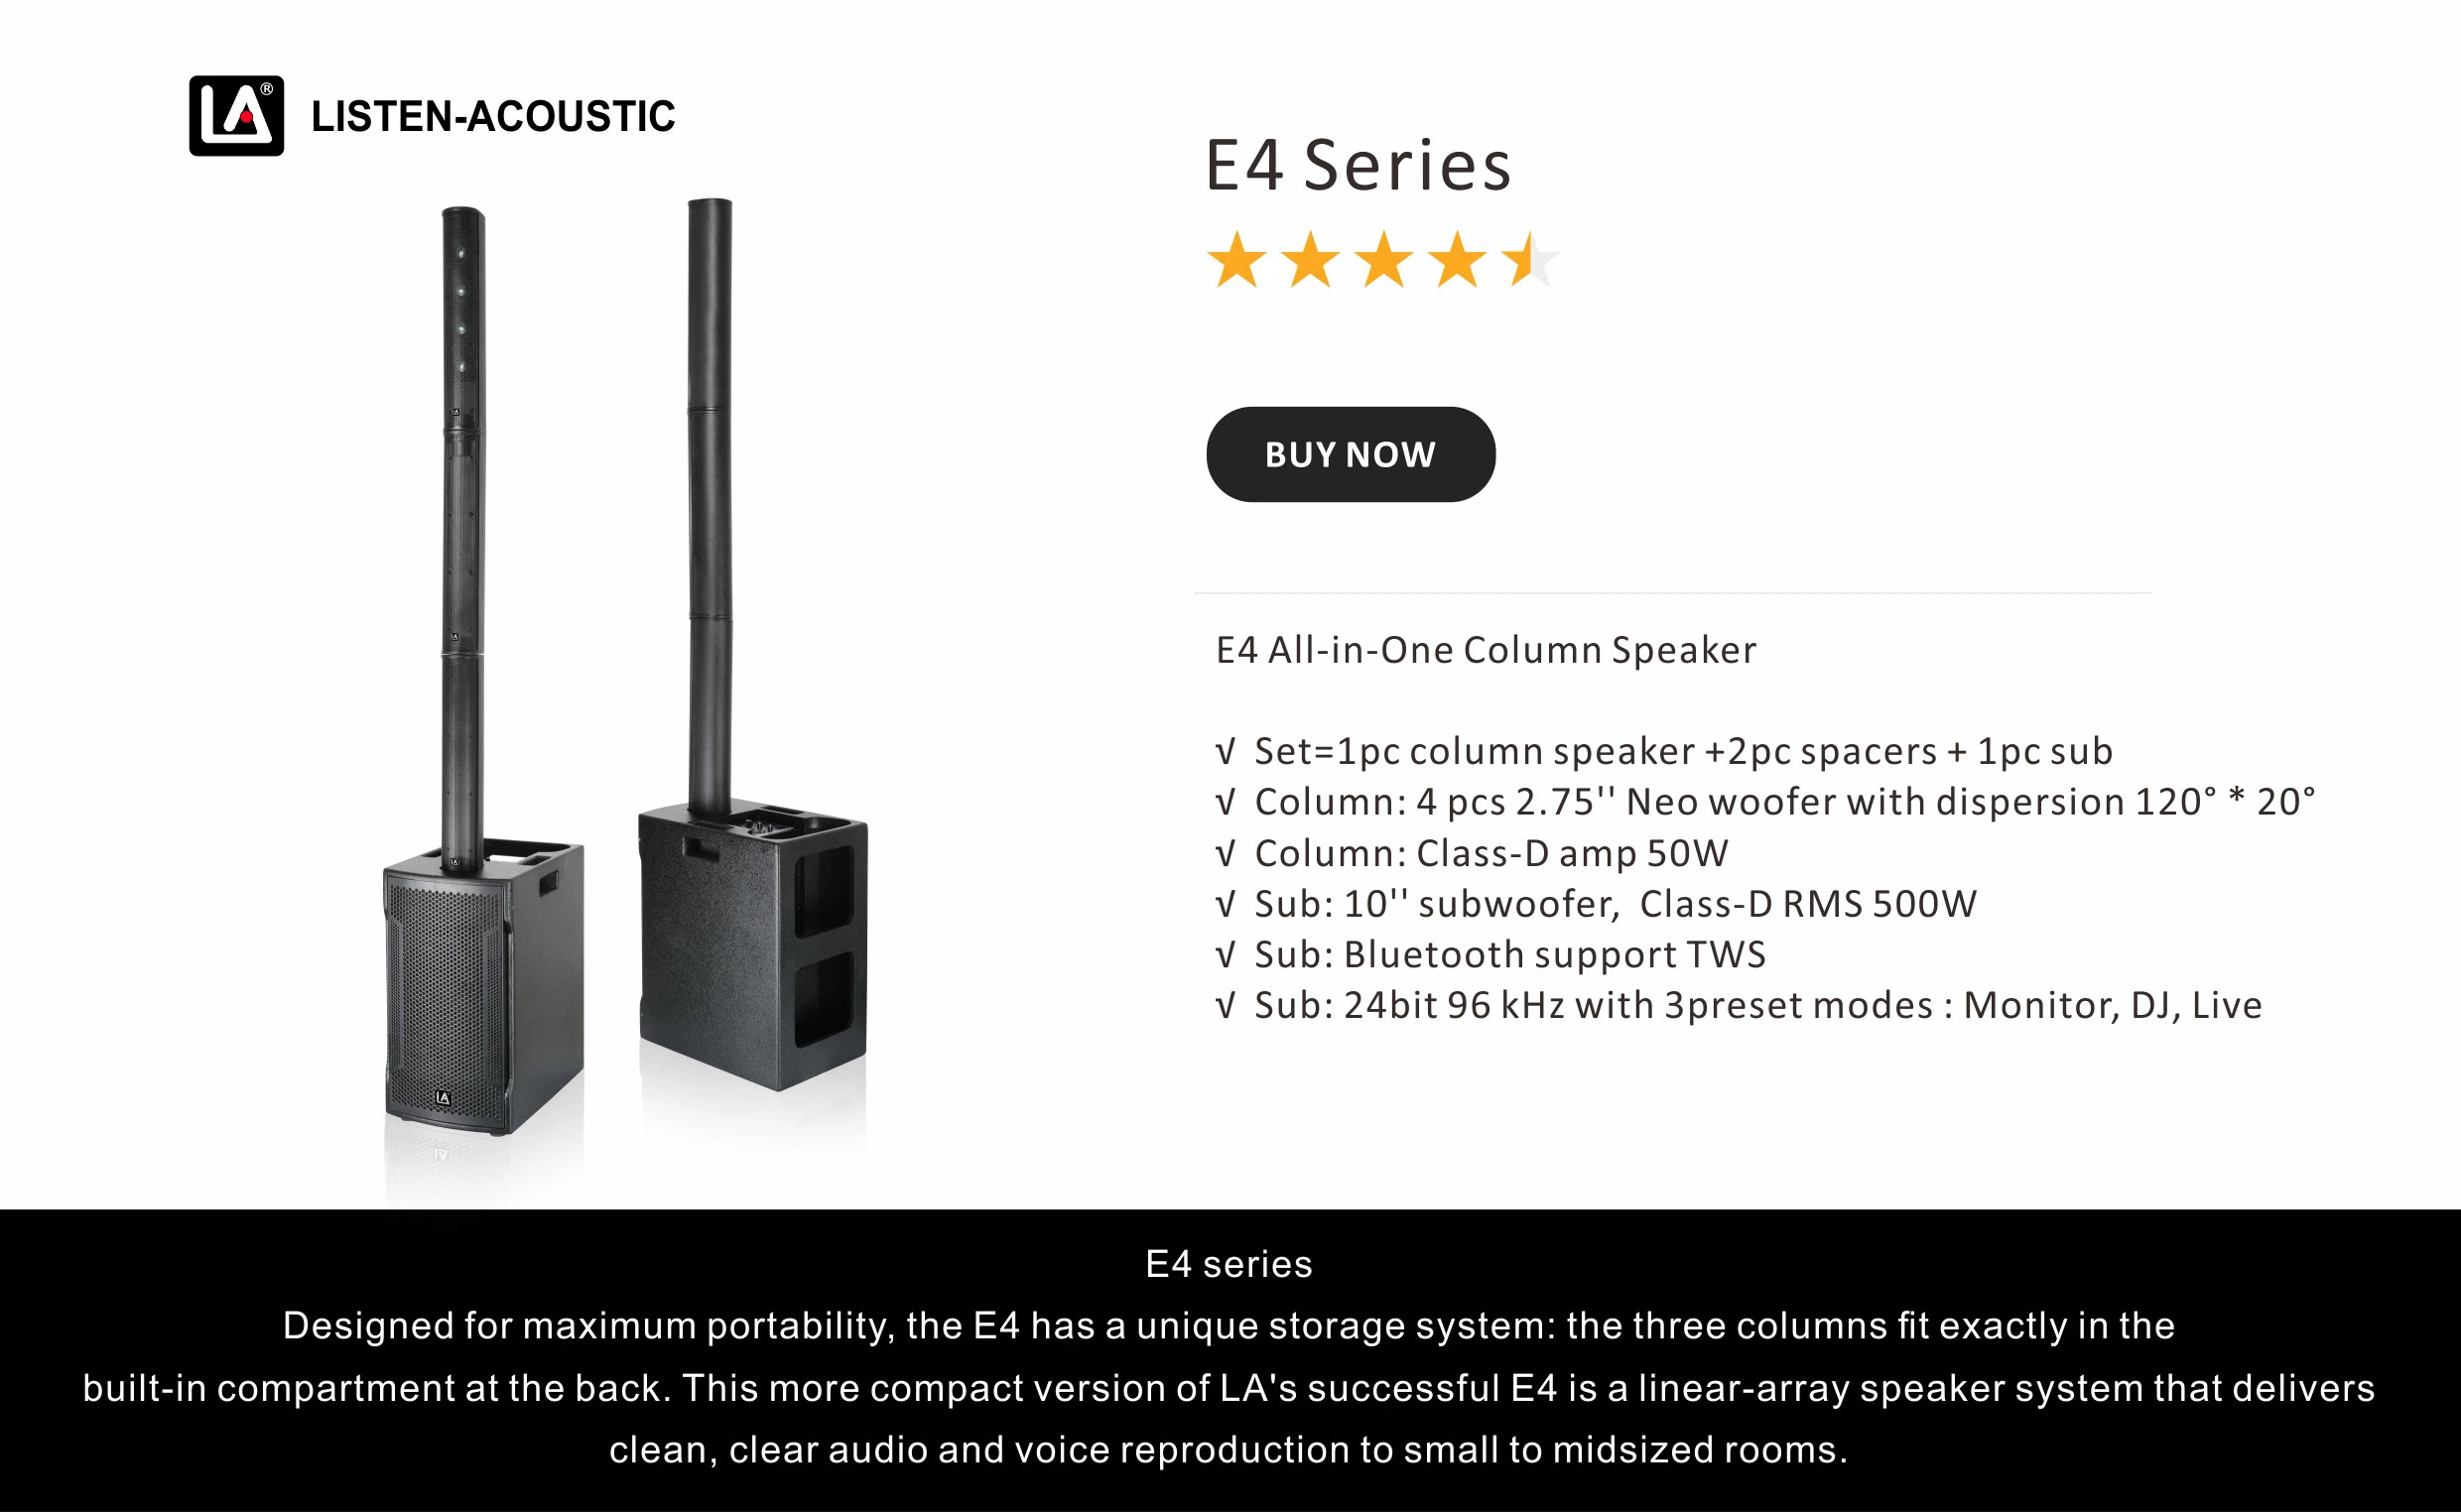 E4 All-in-One Column Speaker √ Set=1pc column speaker +2pc spacers + 1pc sub √ Column: 4 pcs 2.75'' Neo woofer with dispersion 120° * 20° √ Column: Class-D amp 50W √ Sub: 10'' subwoofer, Class-D RMS 500W √ Sub: Bluetooth support TWS √ Sub: 24bit 96 kHz with 3preset modes : Monitor, DJ, Live